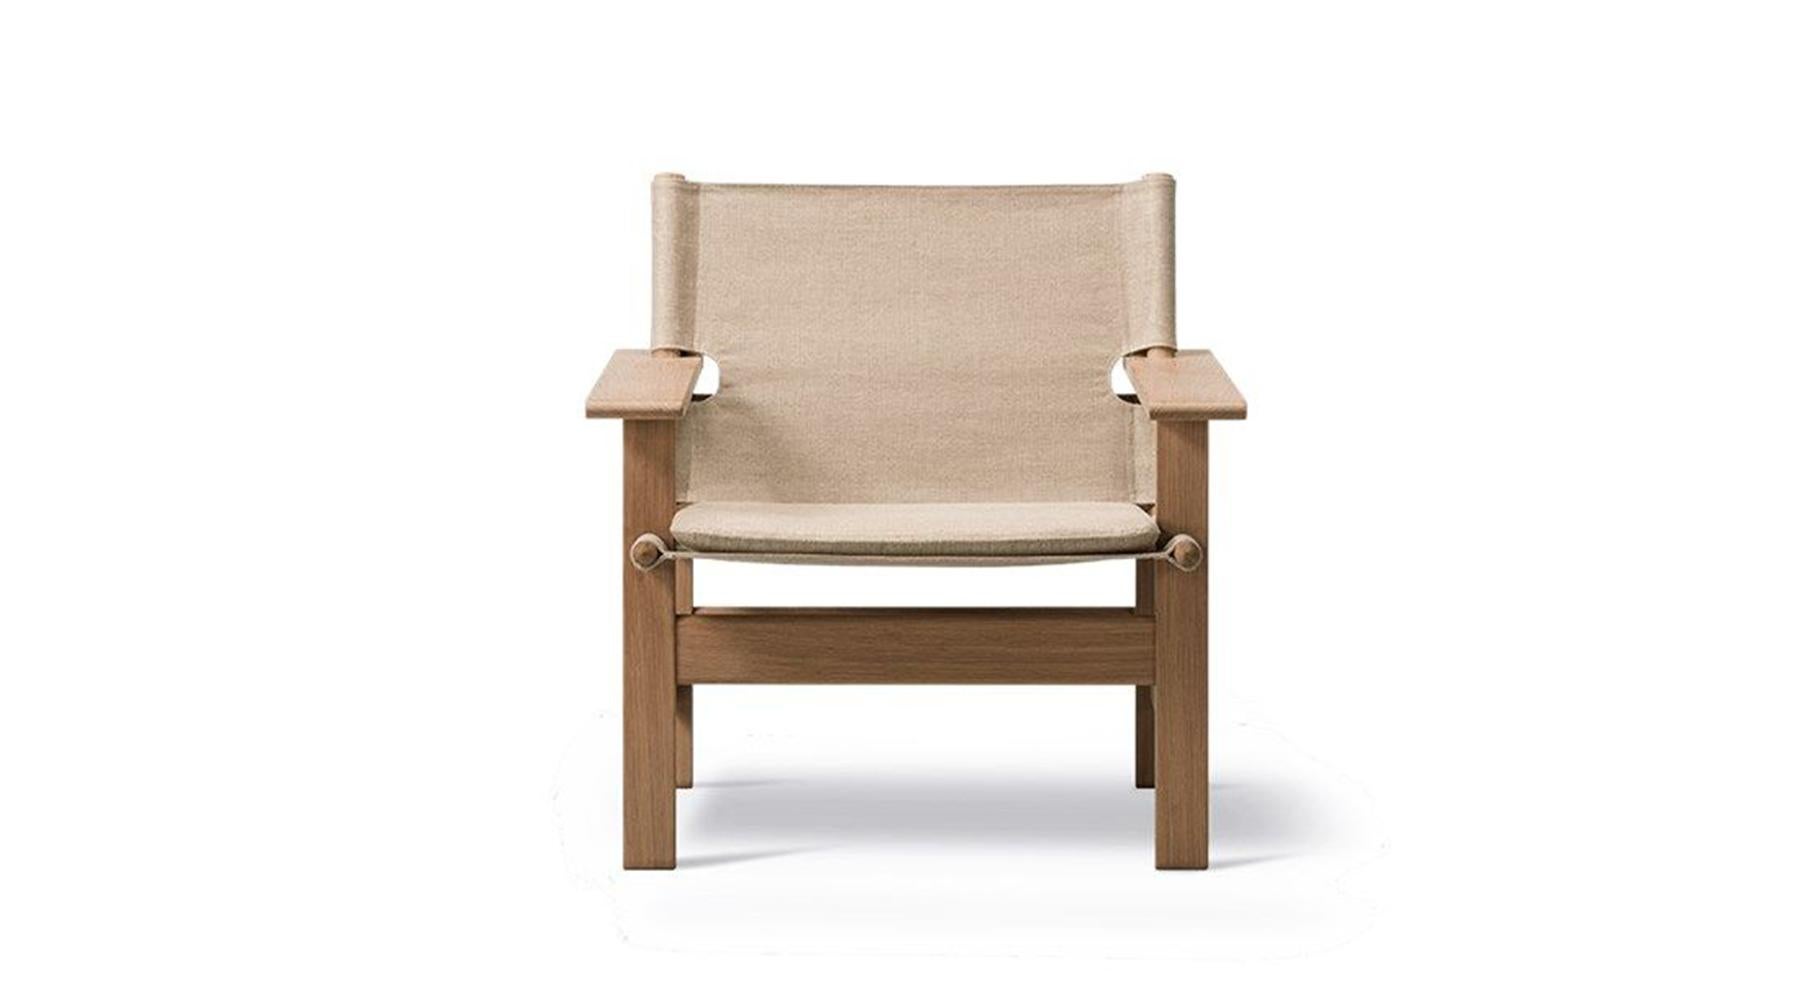 The Canvas chair exemplifies Børge Mogensen’s talent for functionally-driven designs with a focus on simple forms that capture the essence of an idea. With nothing to add or subtract. Drawing on his preference for natural materials, Mogensen used